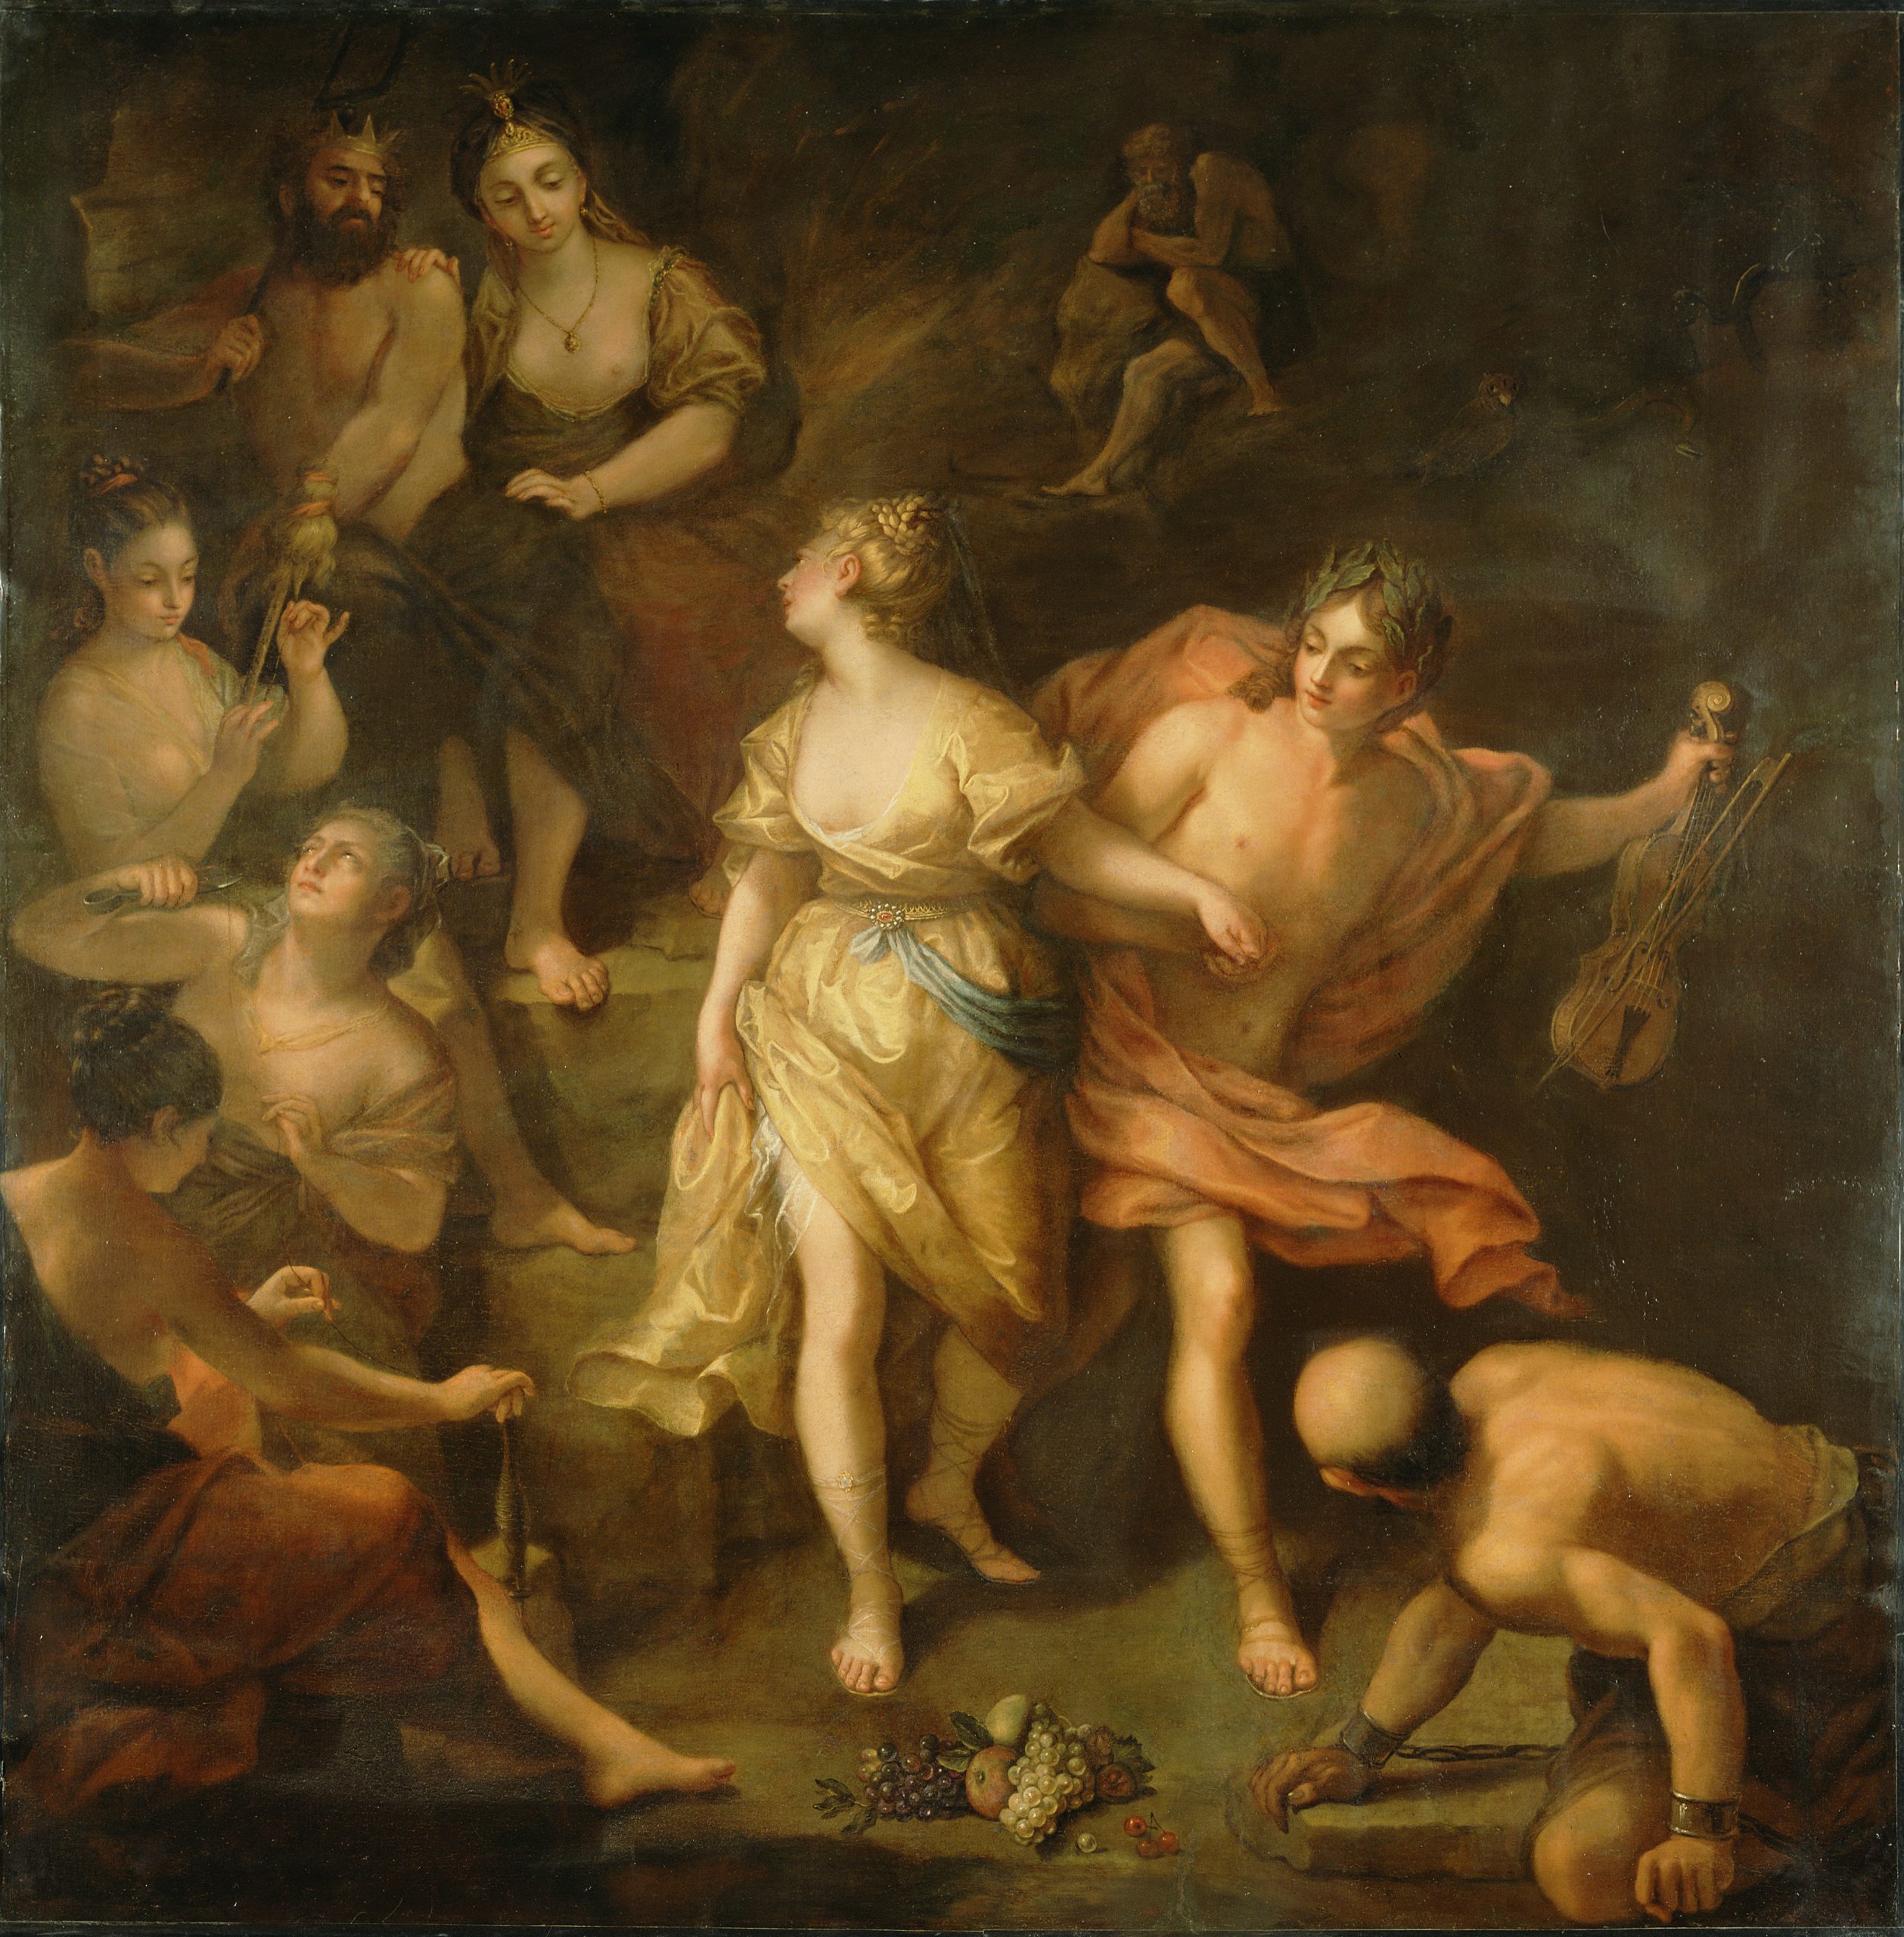 An intricately painted piece with multiple figures. These figures are depicted in a dramatic way all facing one another like in a busy room full of conversation.